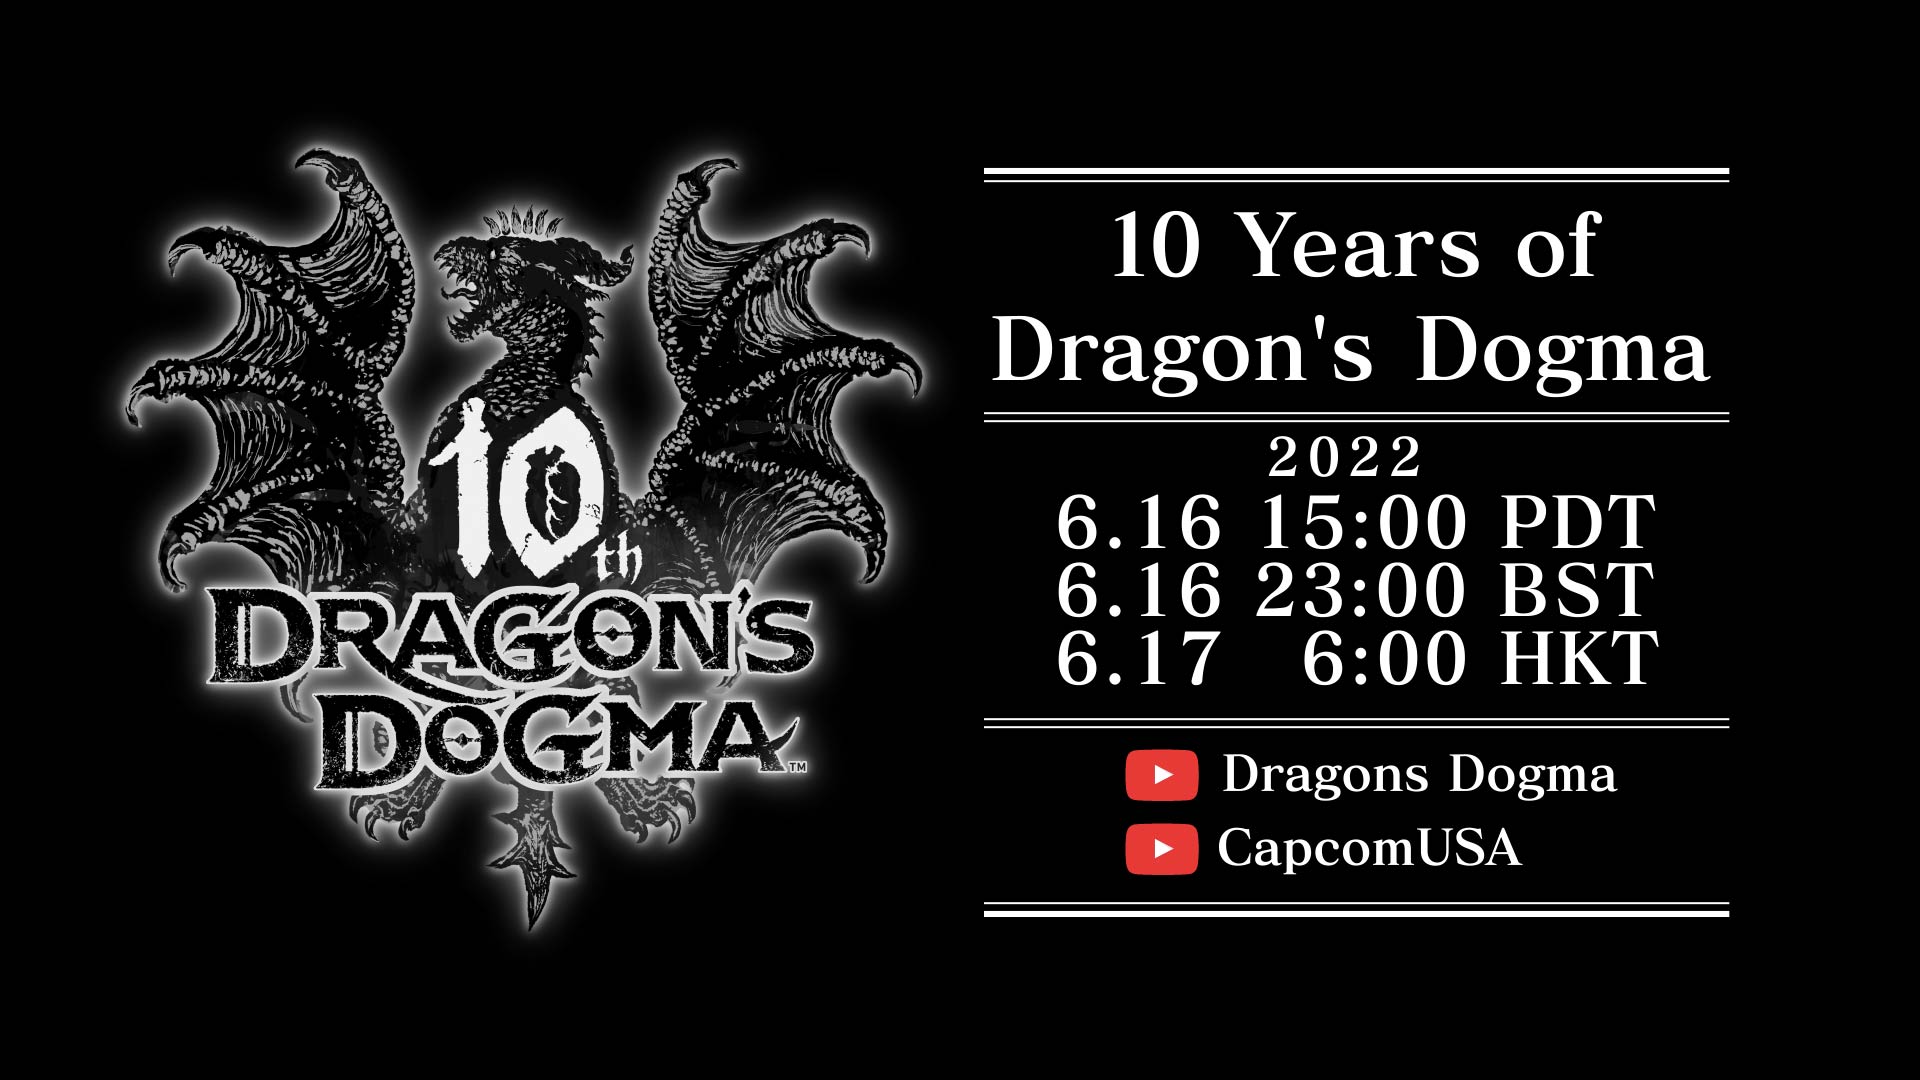 #
      ’10 Years of Dragon’s Dogma’ digital event set for June 16